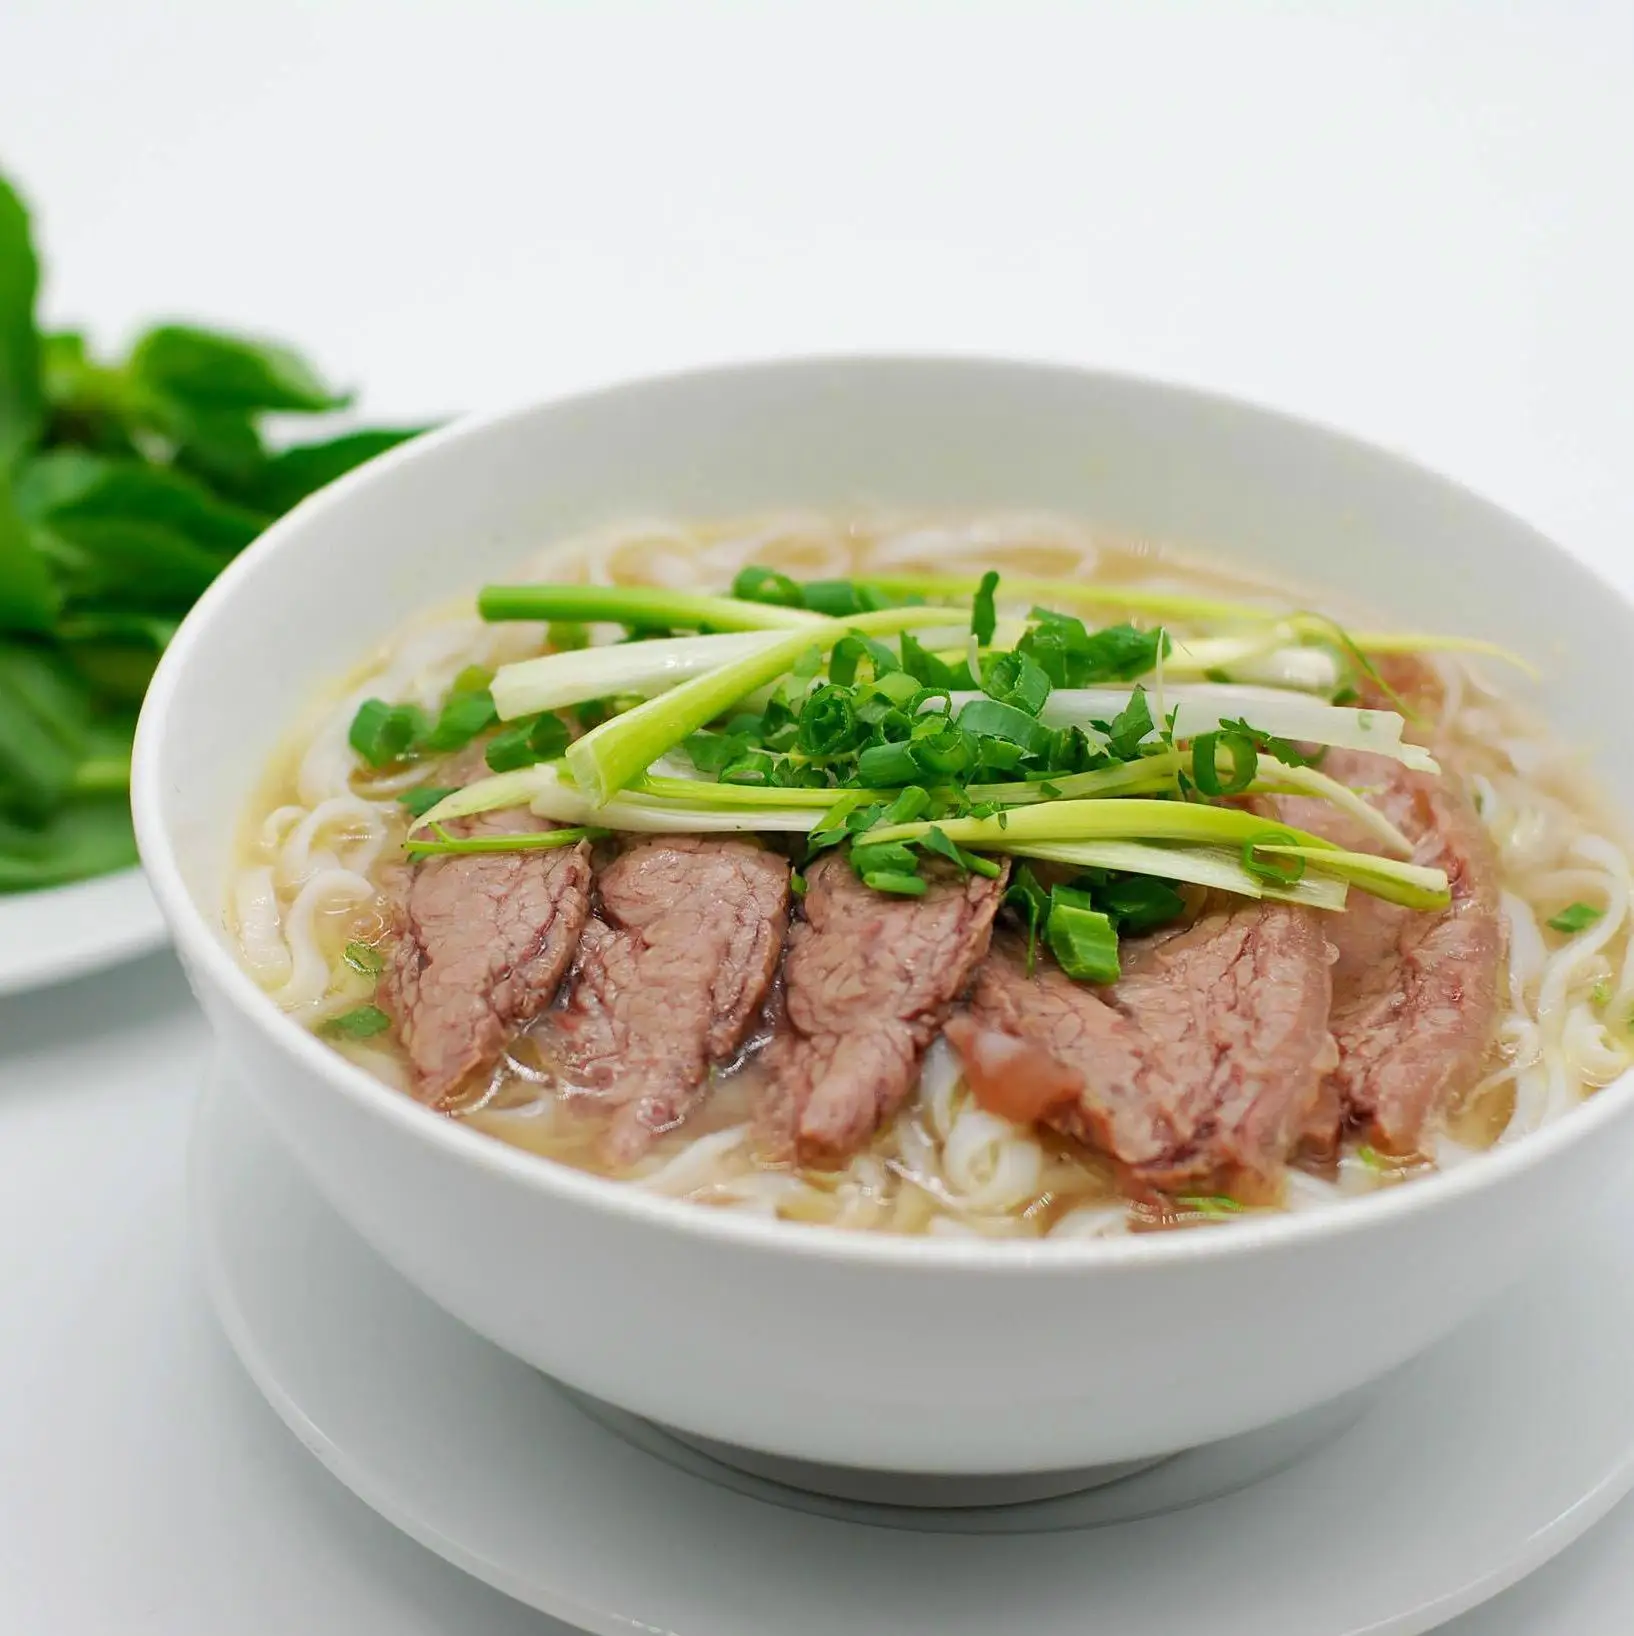 Fresh Pho Noodles Minh Ngoc Best Brand Manufacturer Delicious Cheap Price Low MOQ Hot Selling From Vietnam